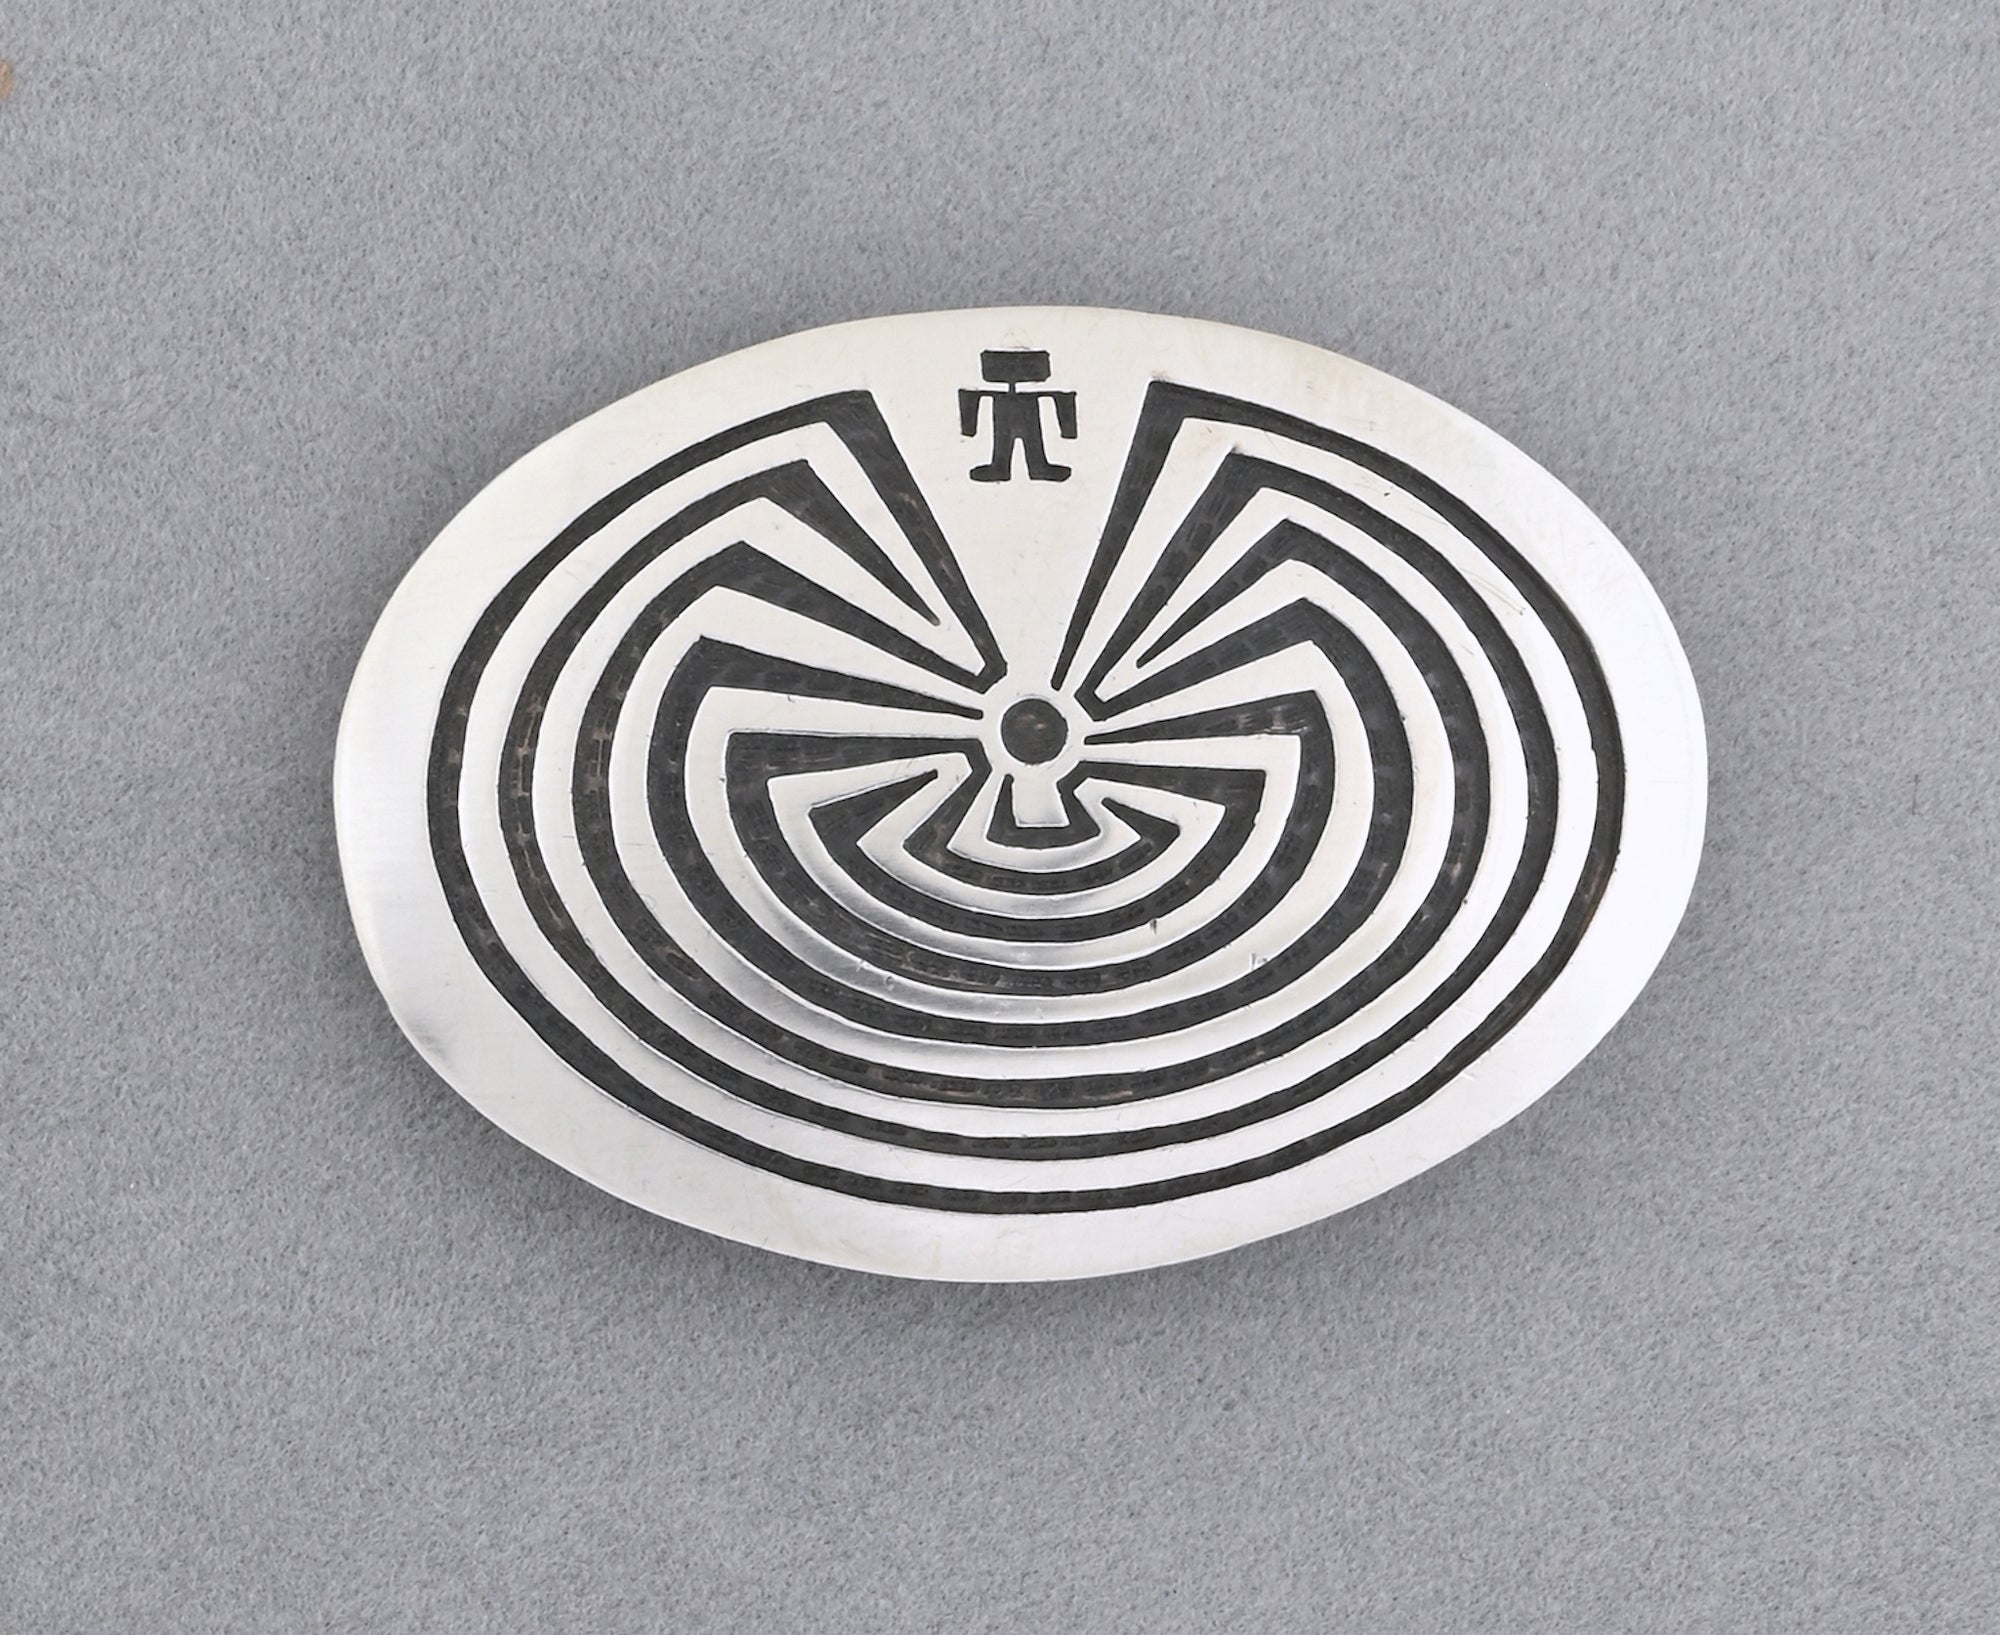 Belt Buckle with Man in the Maze by Alvin Sosolde (Pima)